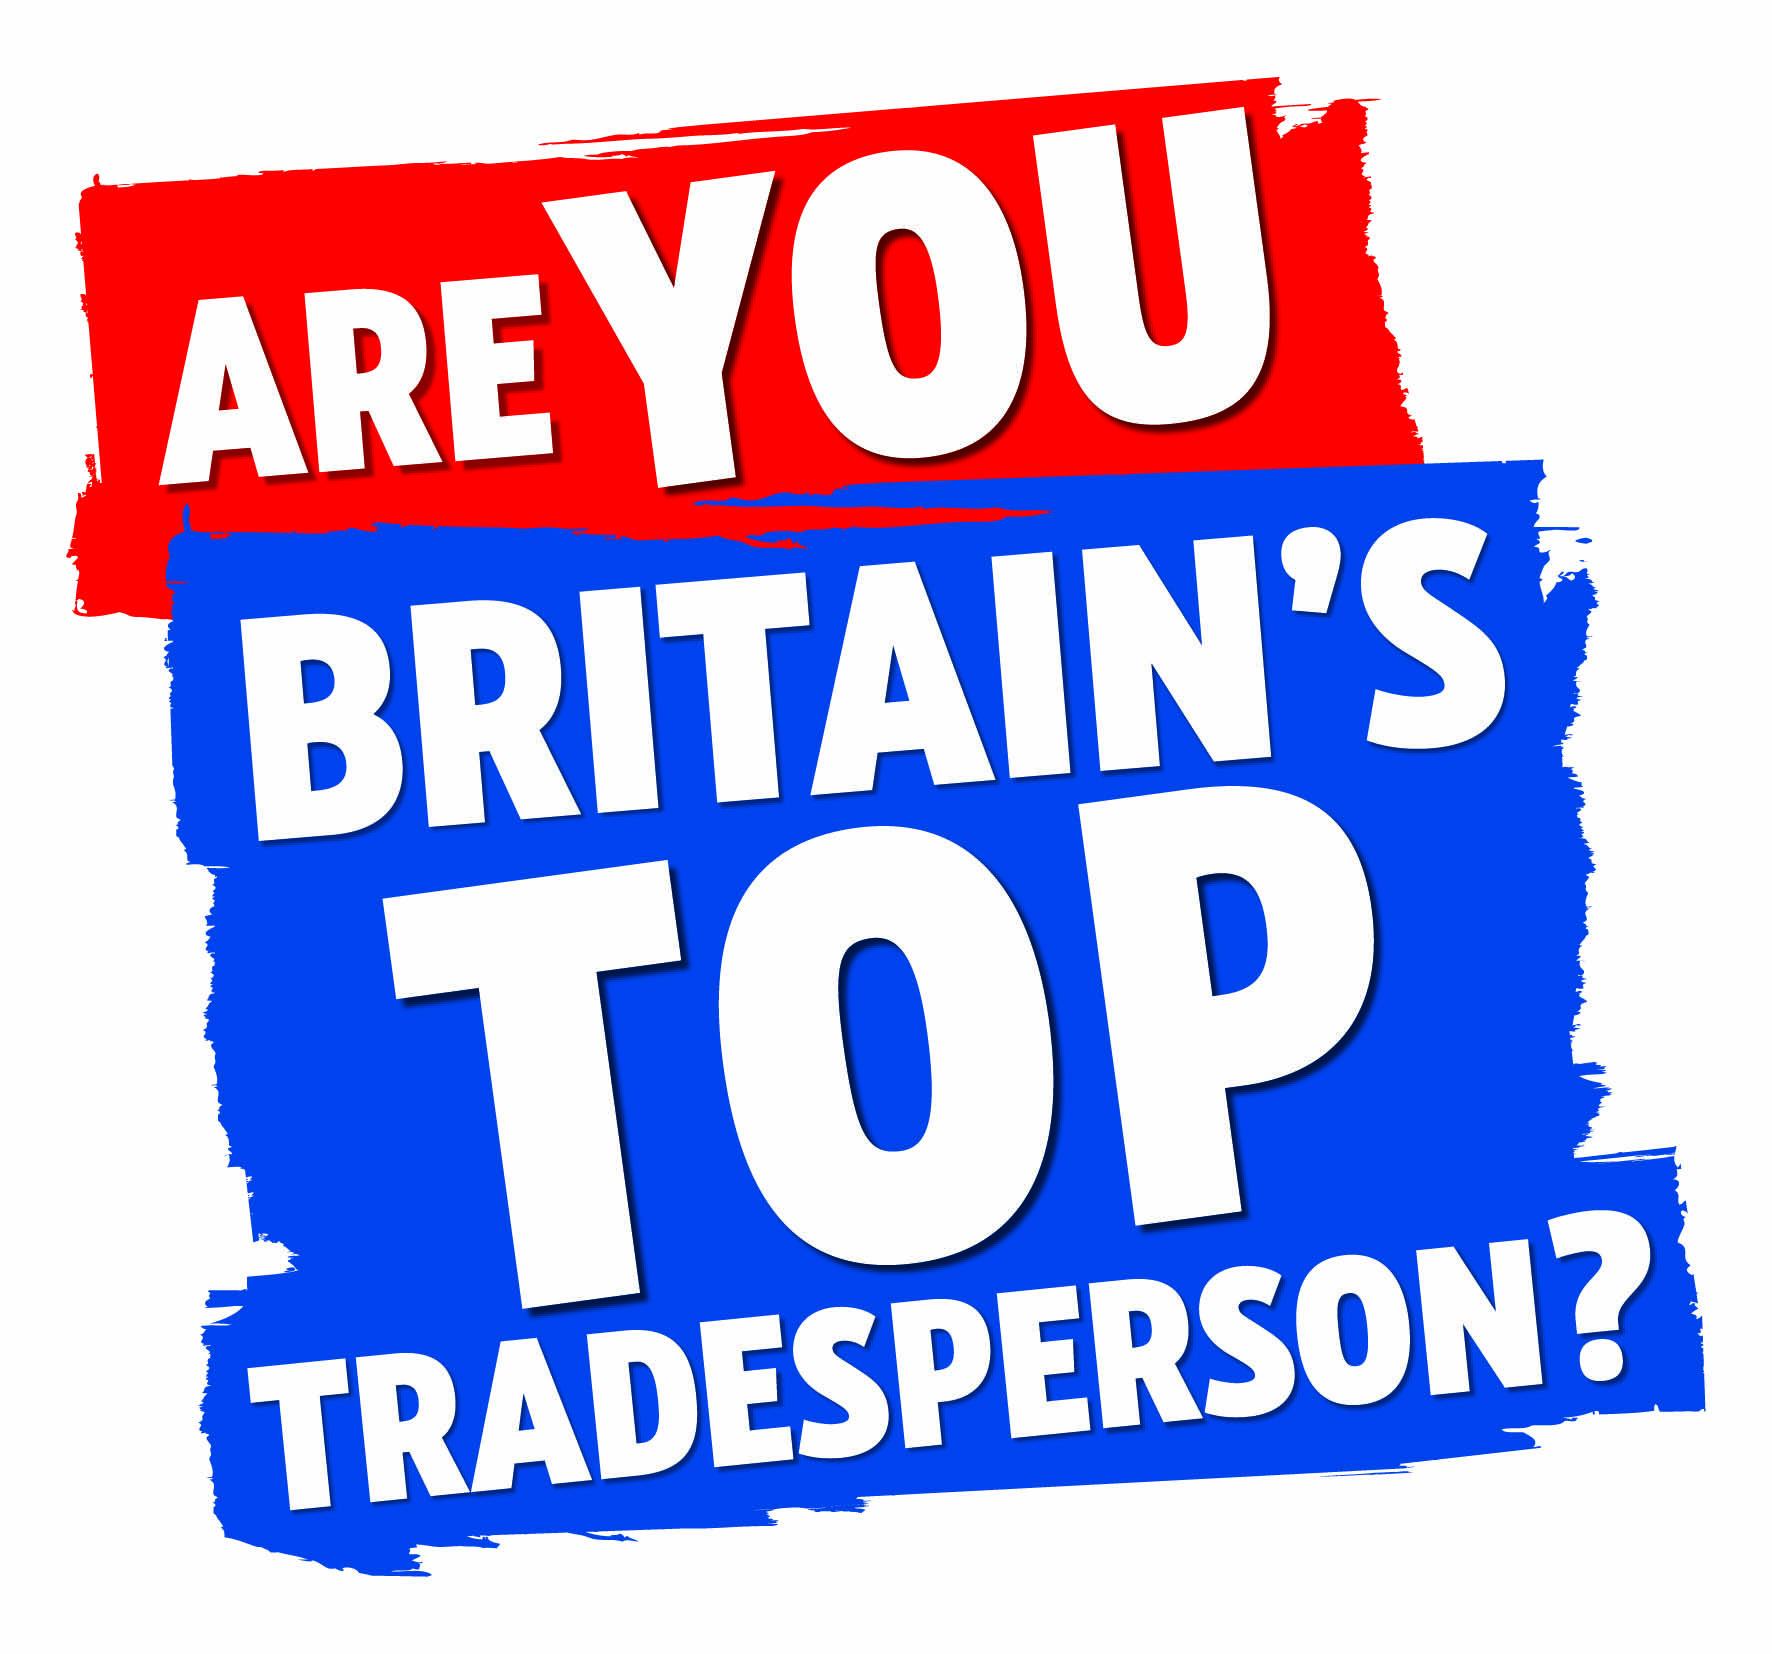 Meet our finalists for Britain’s Top Tradesperson 2017